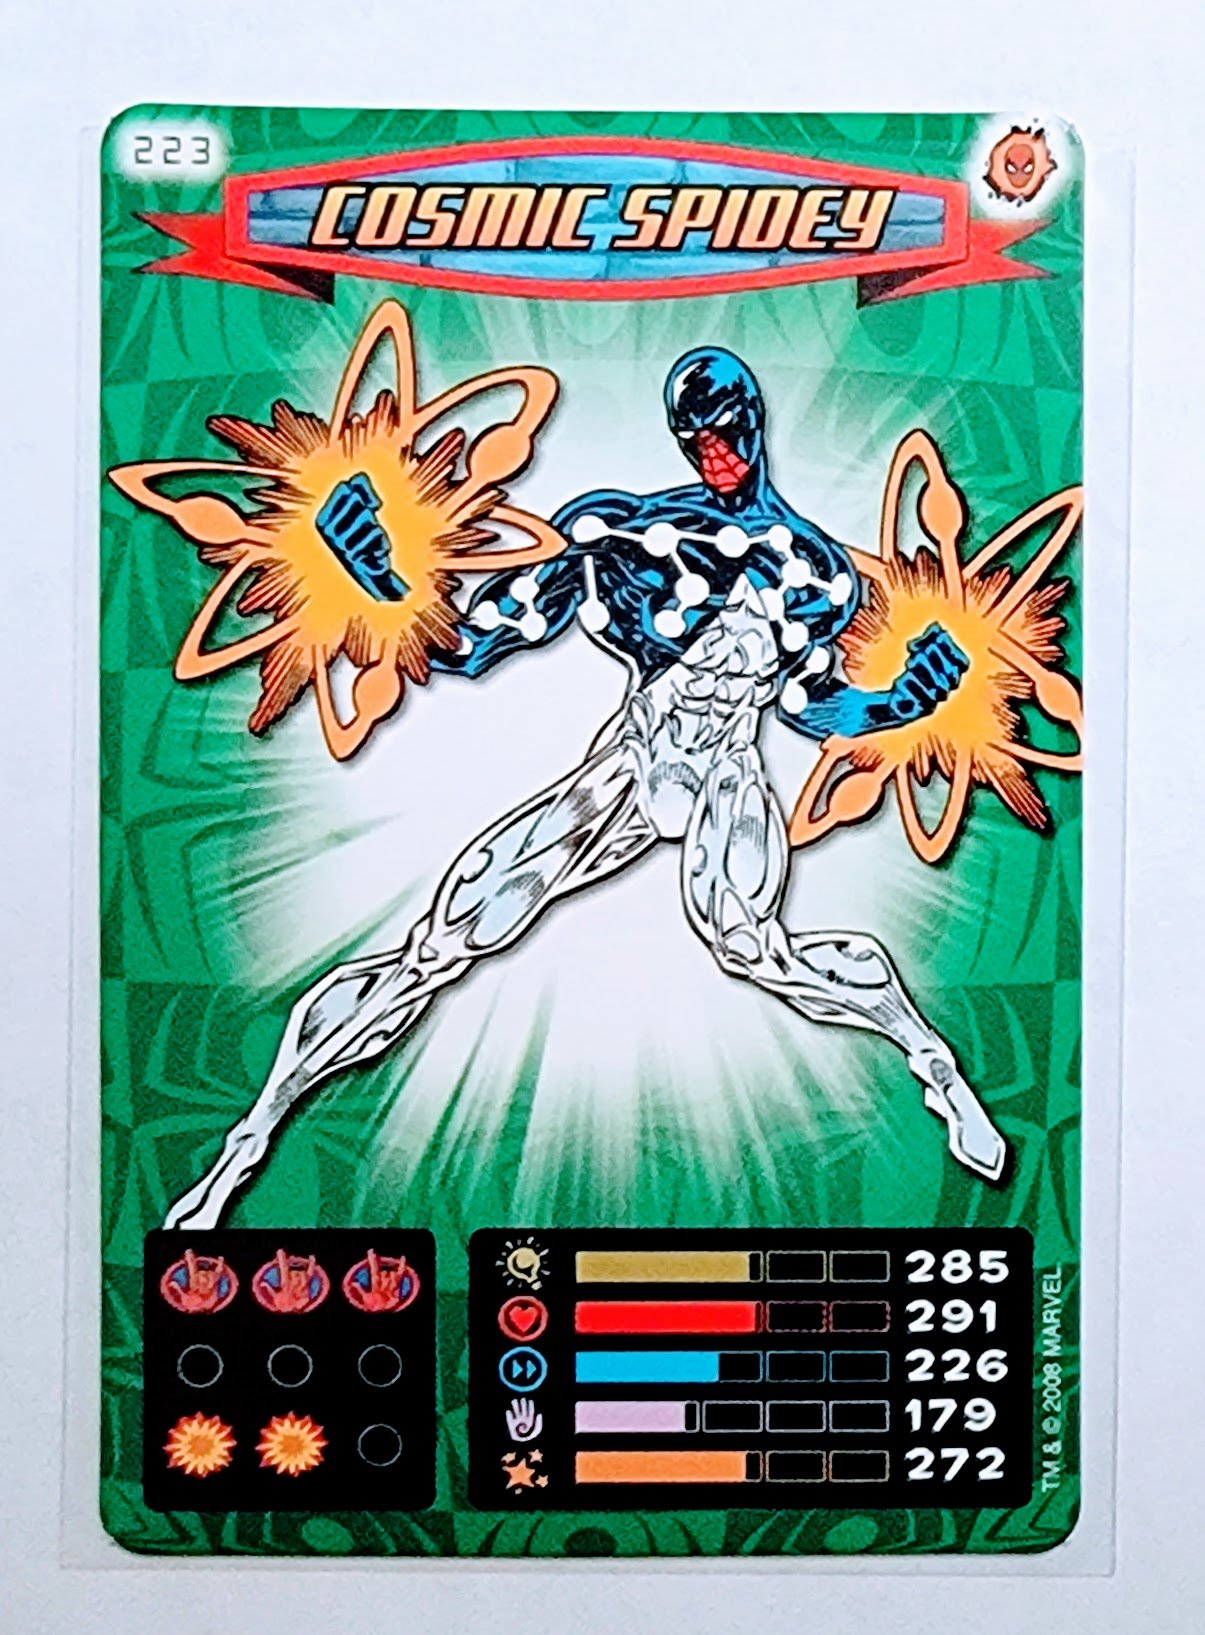 2008 Spiderman Heroes and Villains Cosmic Spidey #223 Marvel Booster Trading Card UPTI simple Xclusive Collectibles   